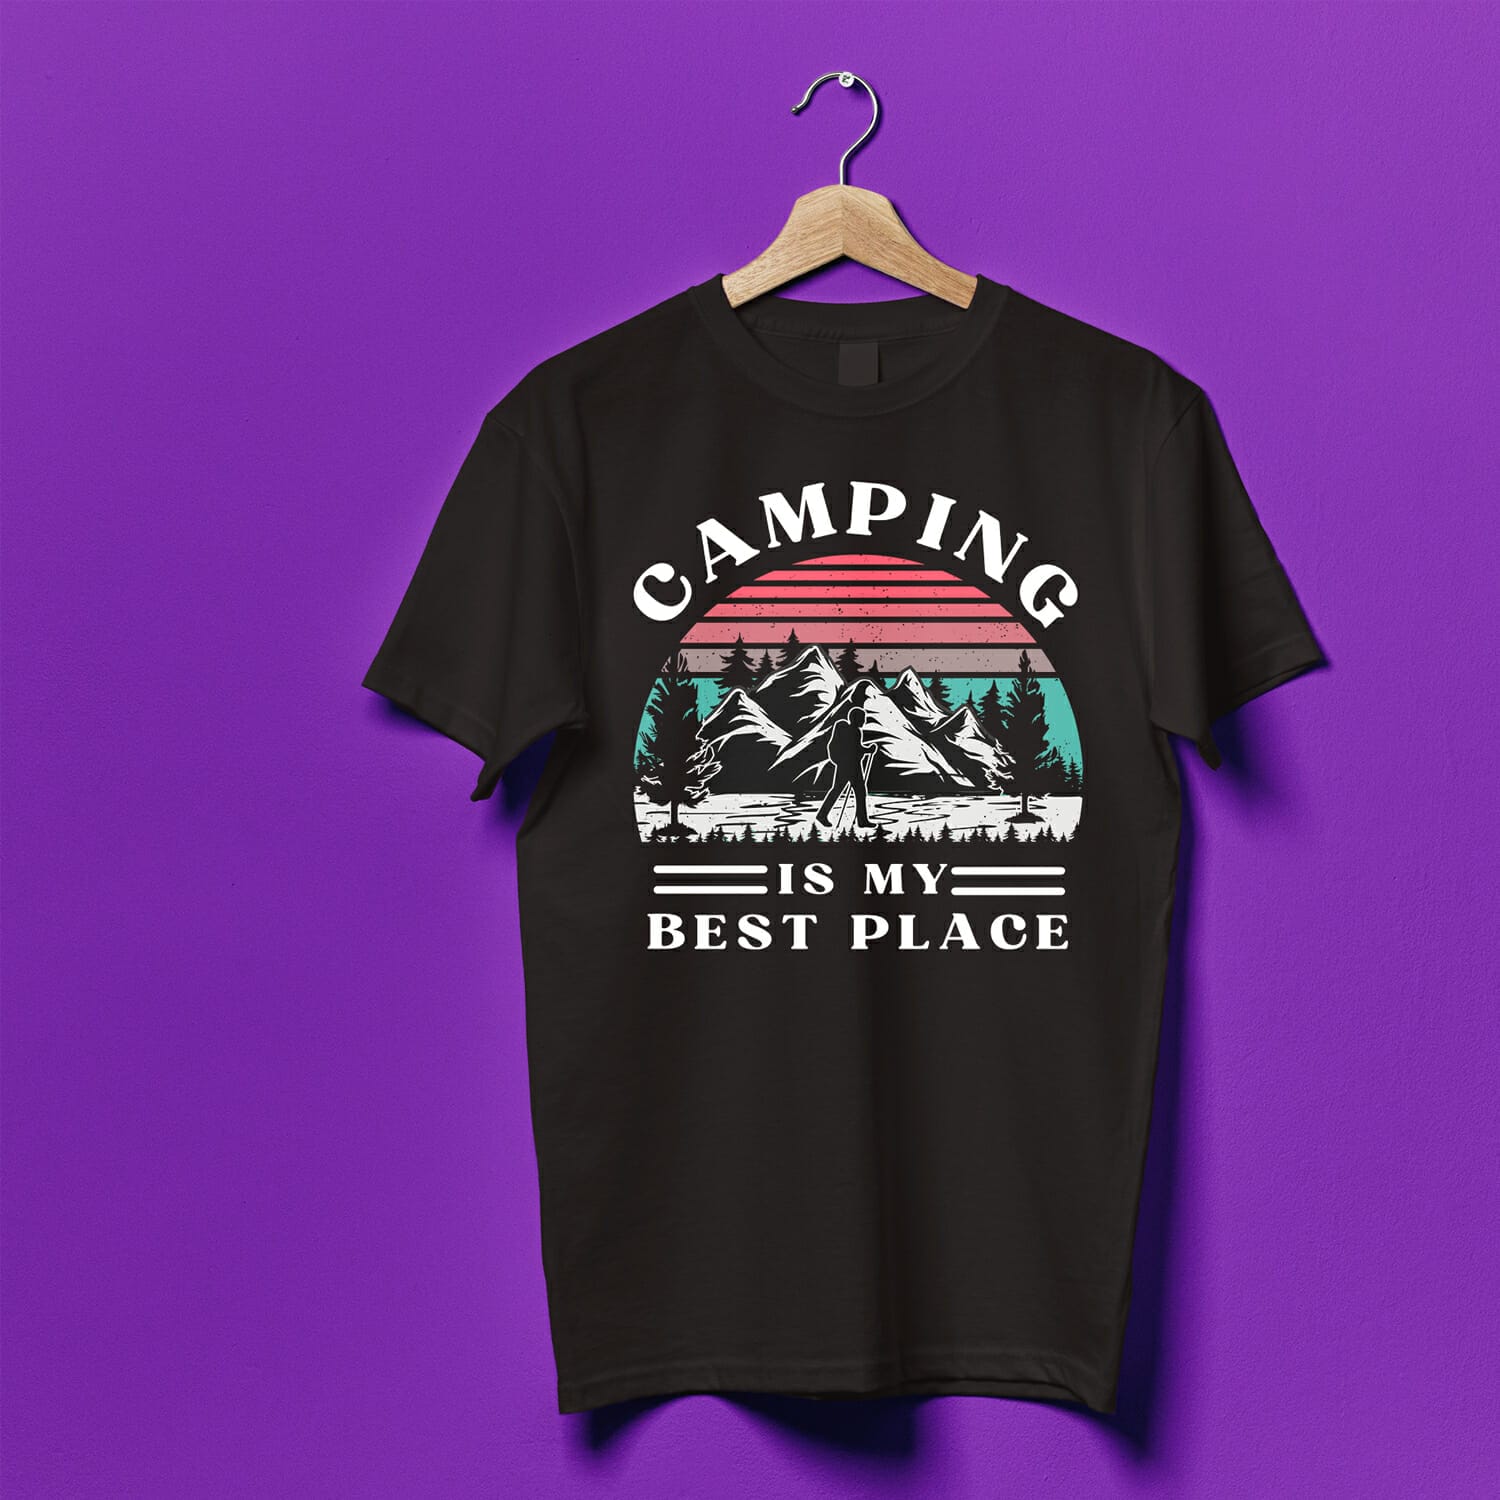 Camping is my best Place T-shirt design